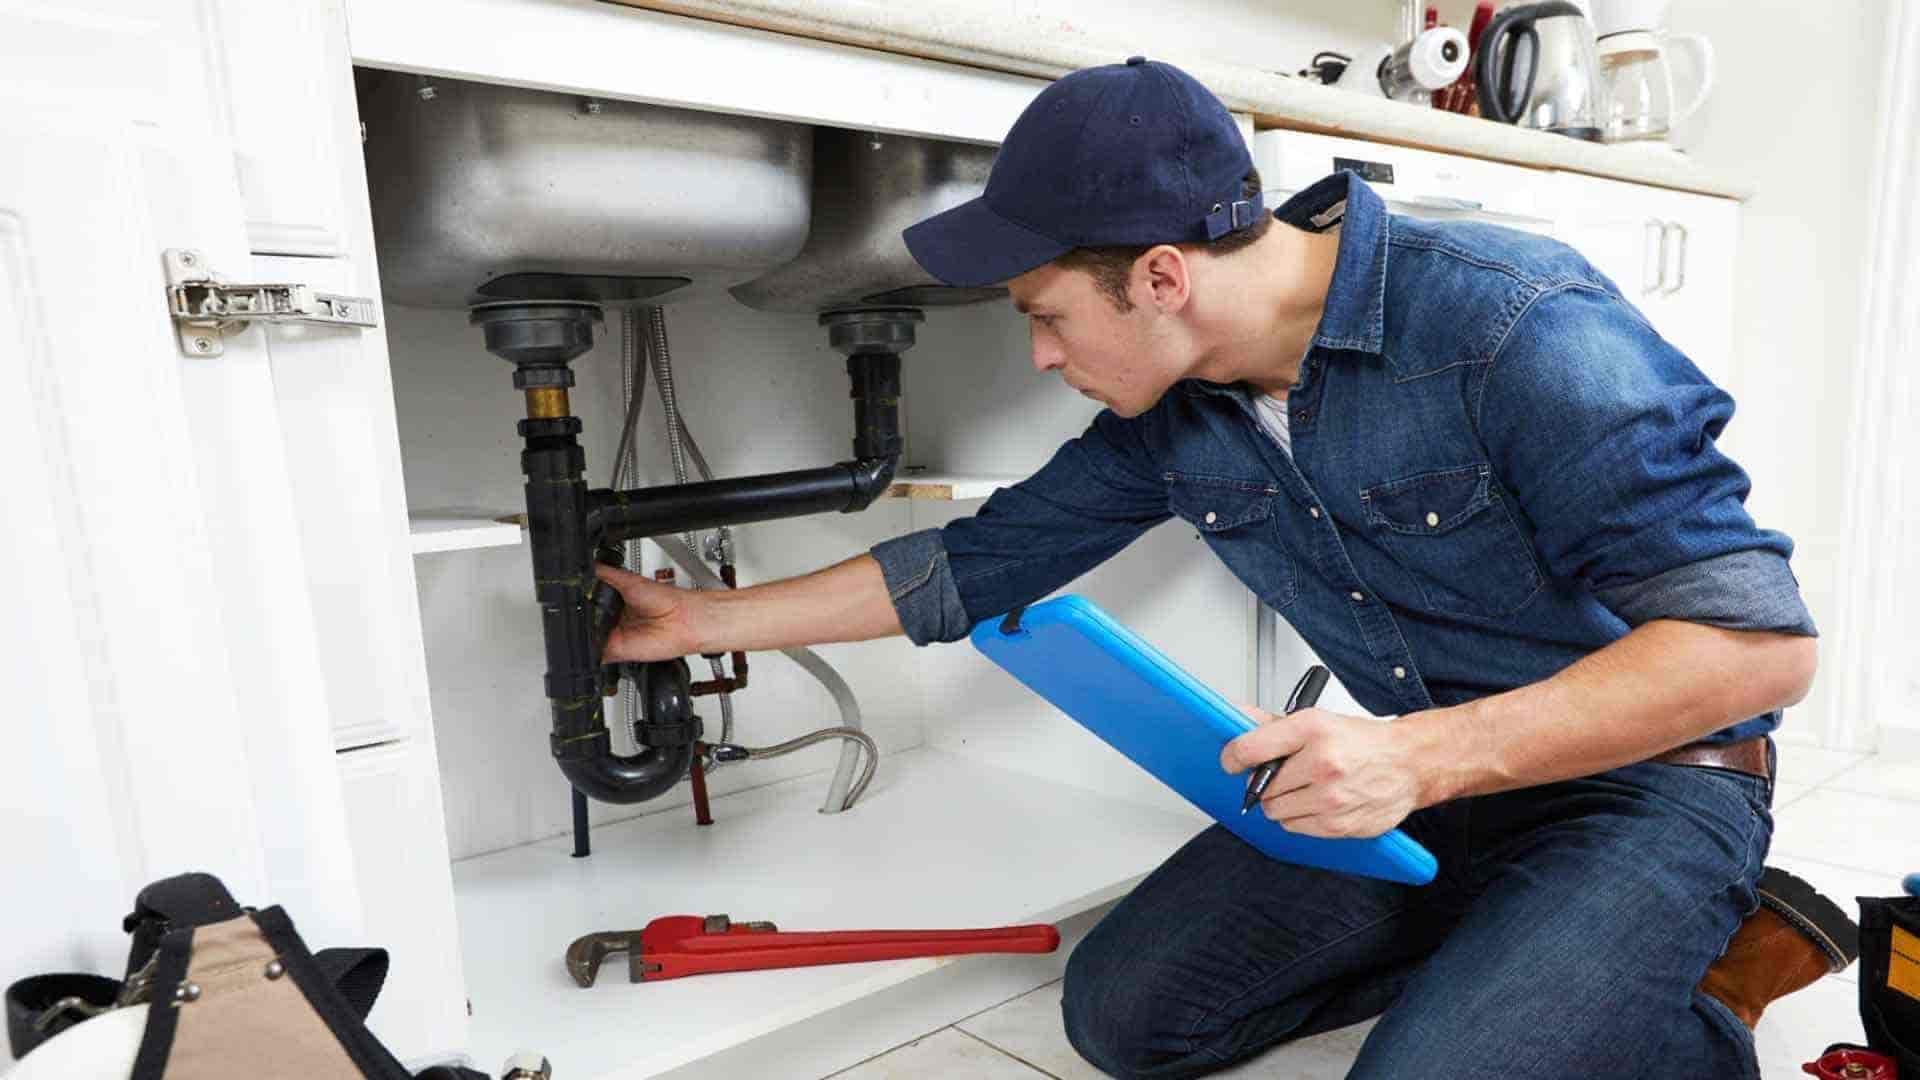 Need a plumber in Gilbert? AquaSmart Plumbing is your 24/7 emergency plumbing, commercial plumbing, and drain cleaning service